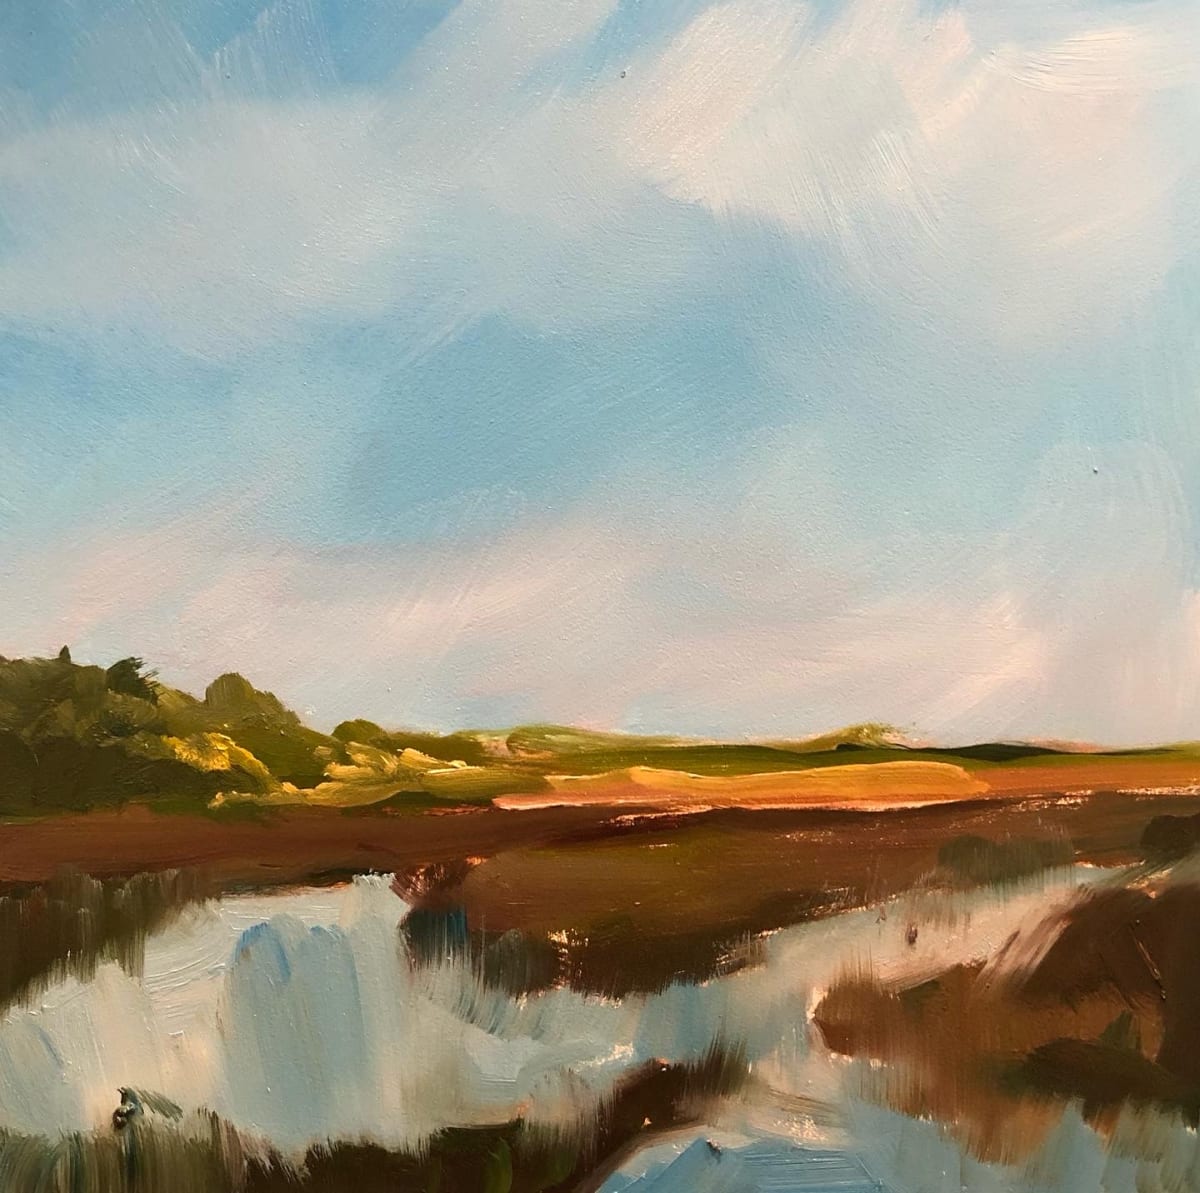 small scape-low country #8  Image: Scape Sketch Collection-special places on my journey of life

scape sketch-low country #8

6x6 oil on ampersand museum gesso panel 2022

This painting was inspired by the views of the marshlands in the low country of South Carolina.